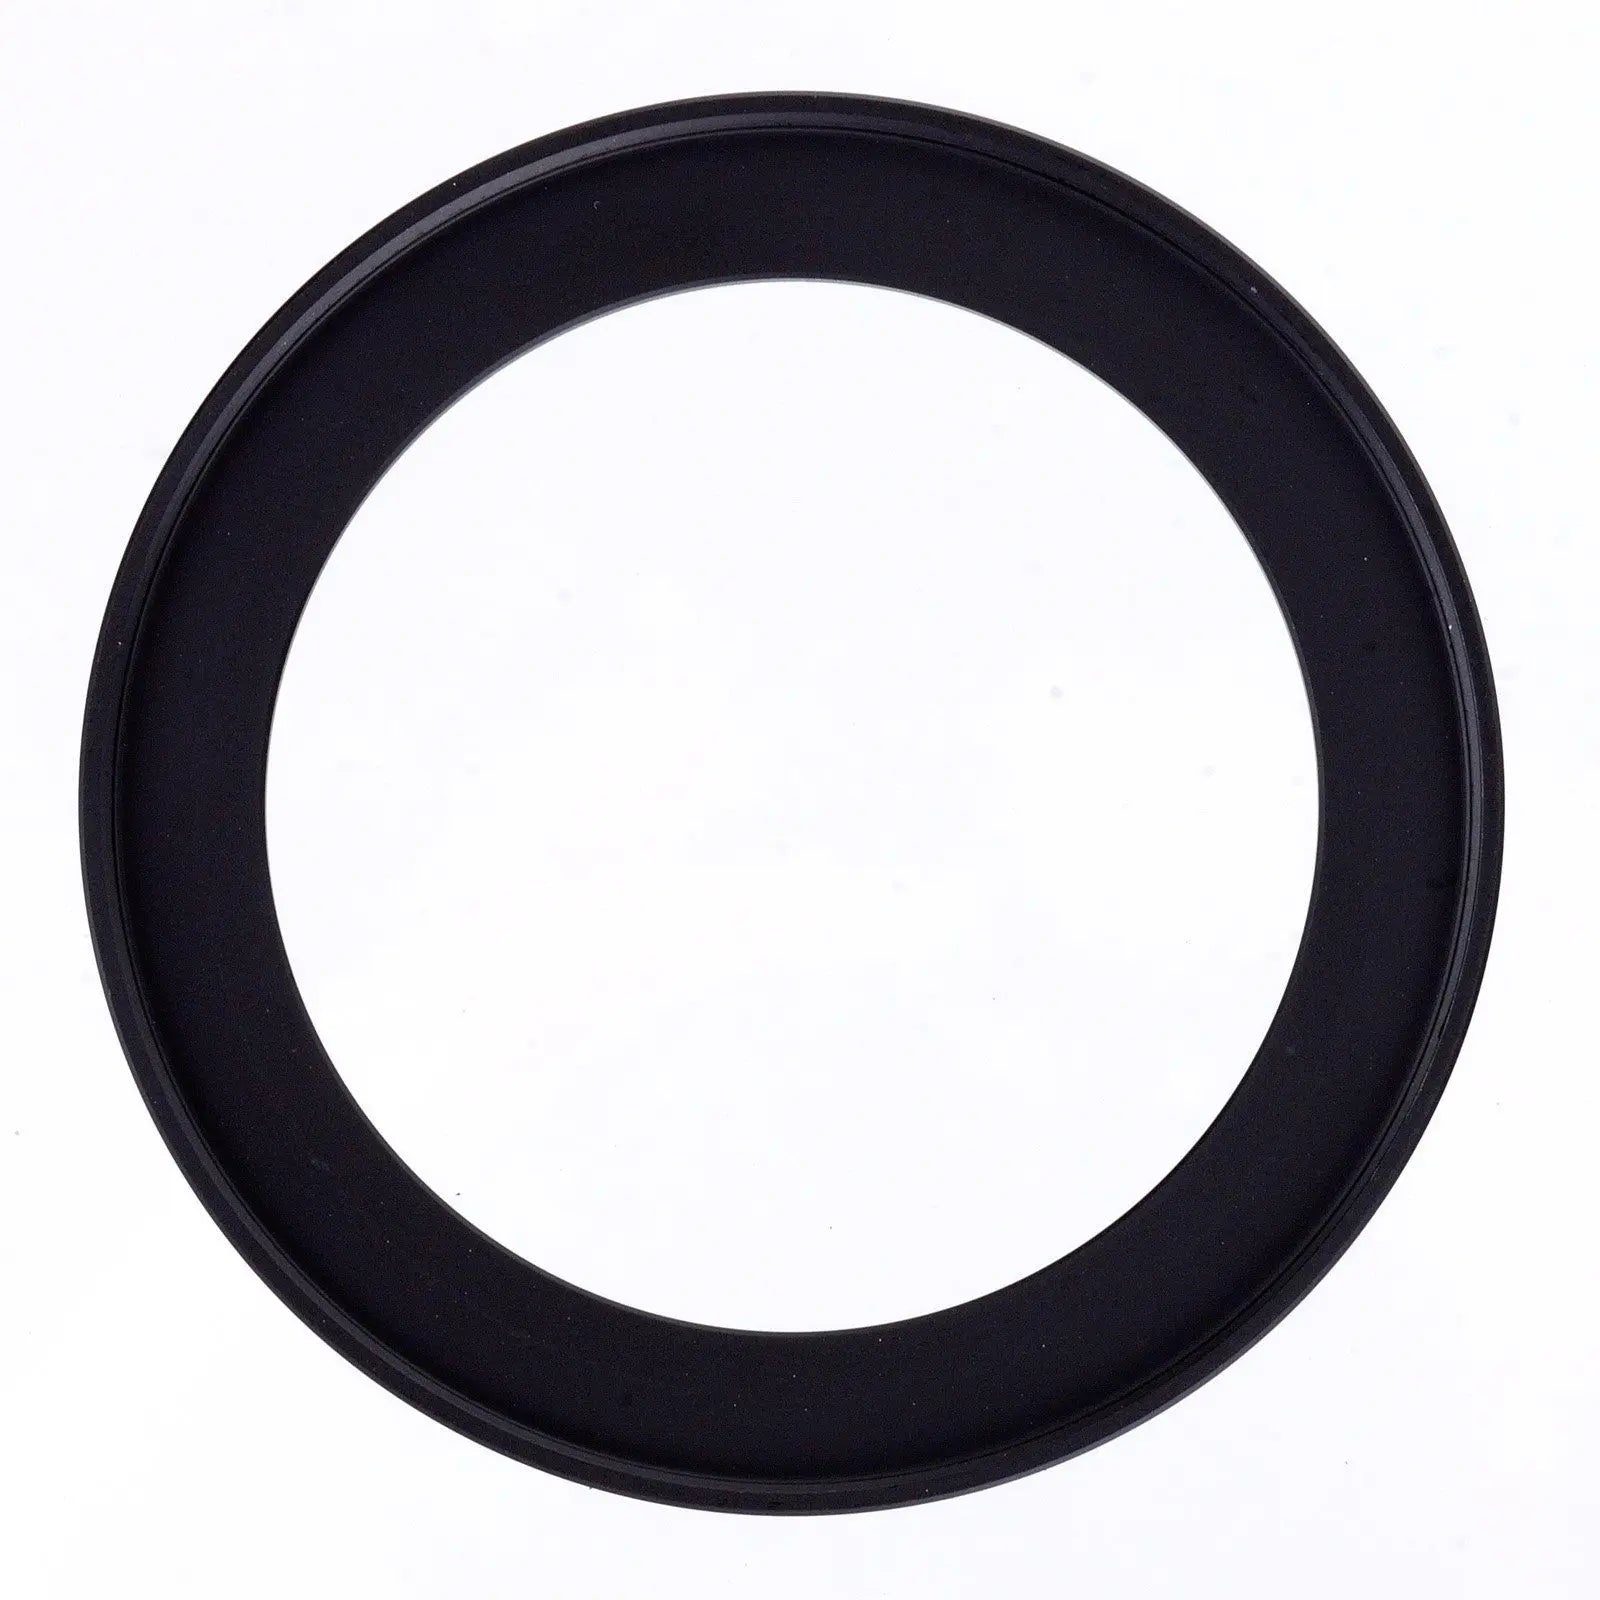 58mm-72mm Step Up Ring - REALM DISTRIBUTION